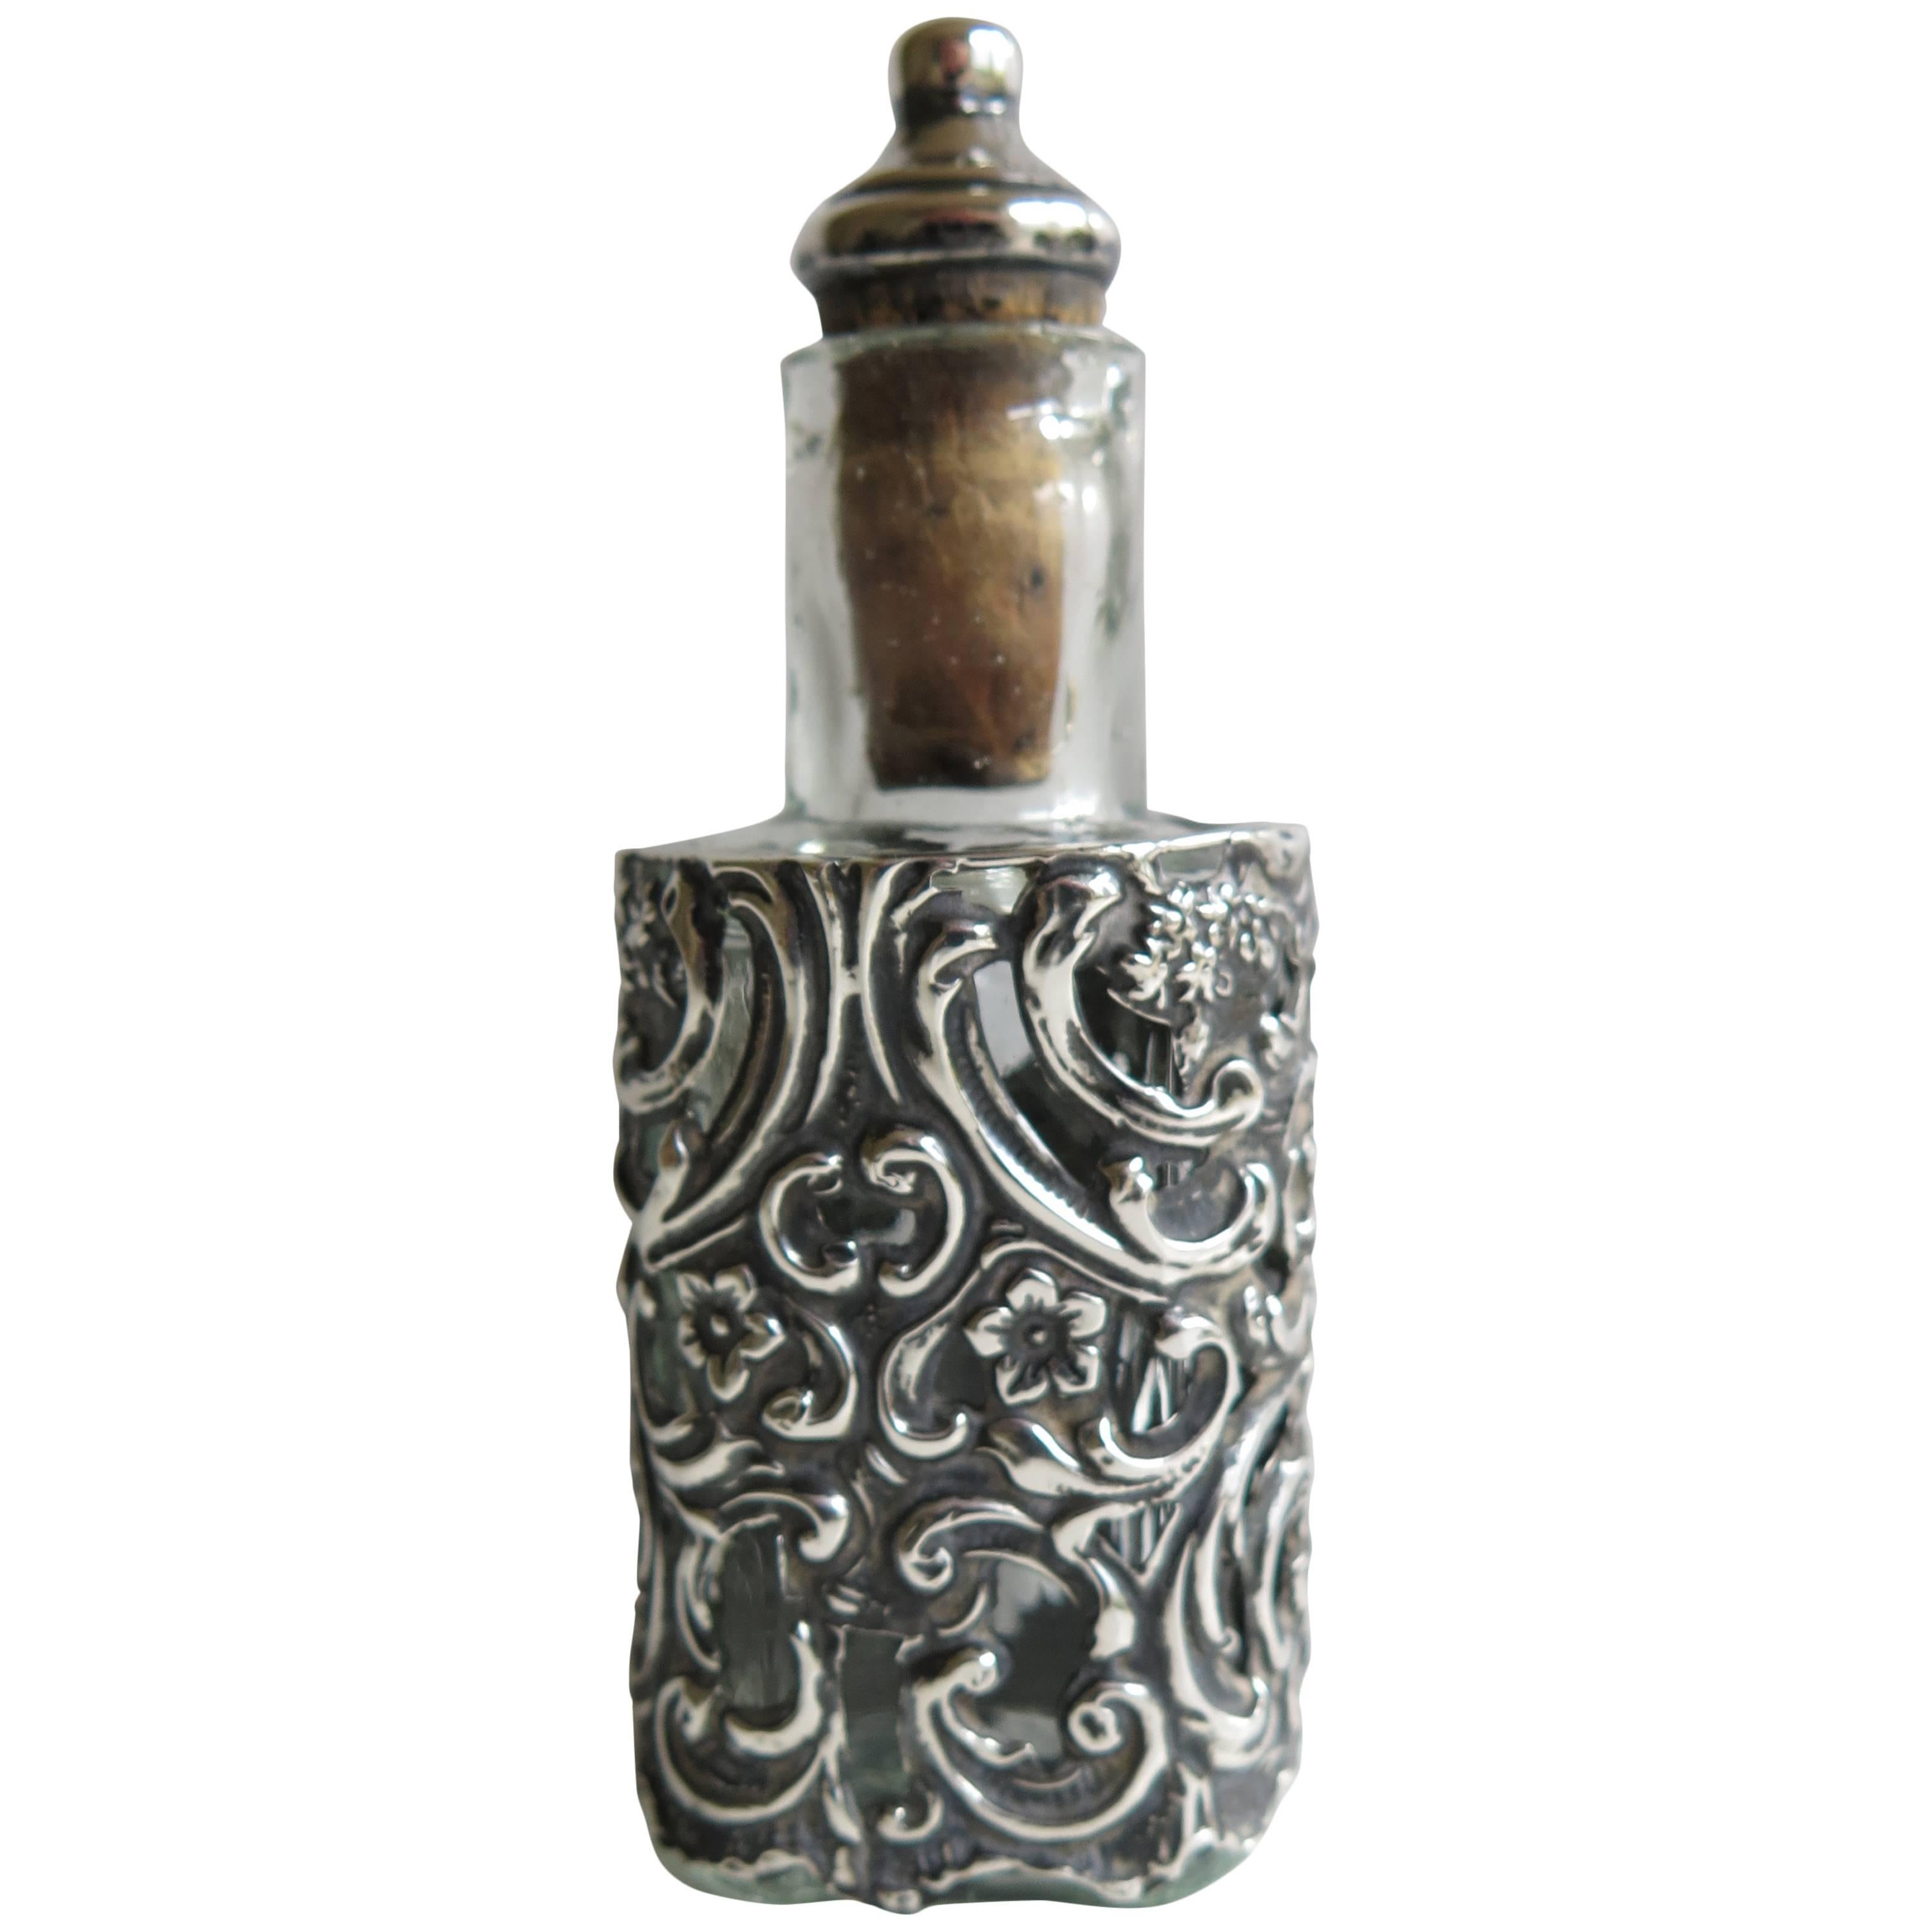 This is a high quality sterling silver cased glass perfume or scent bottle, made in Edwardian England in 1904

The pressed glass bottle is rectangular with curved sides and carries the name; Johann Grossmith to one side.

The glass bottle is